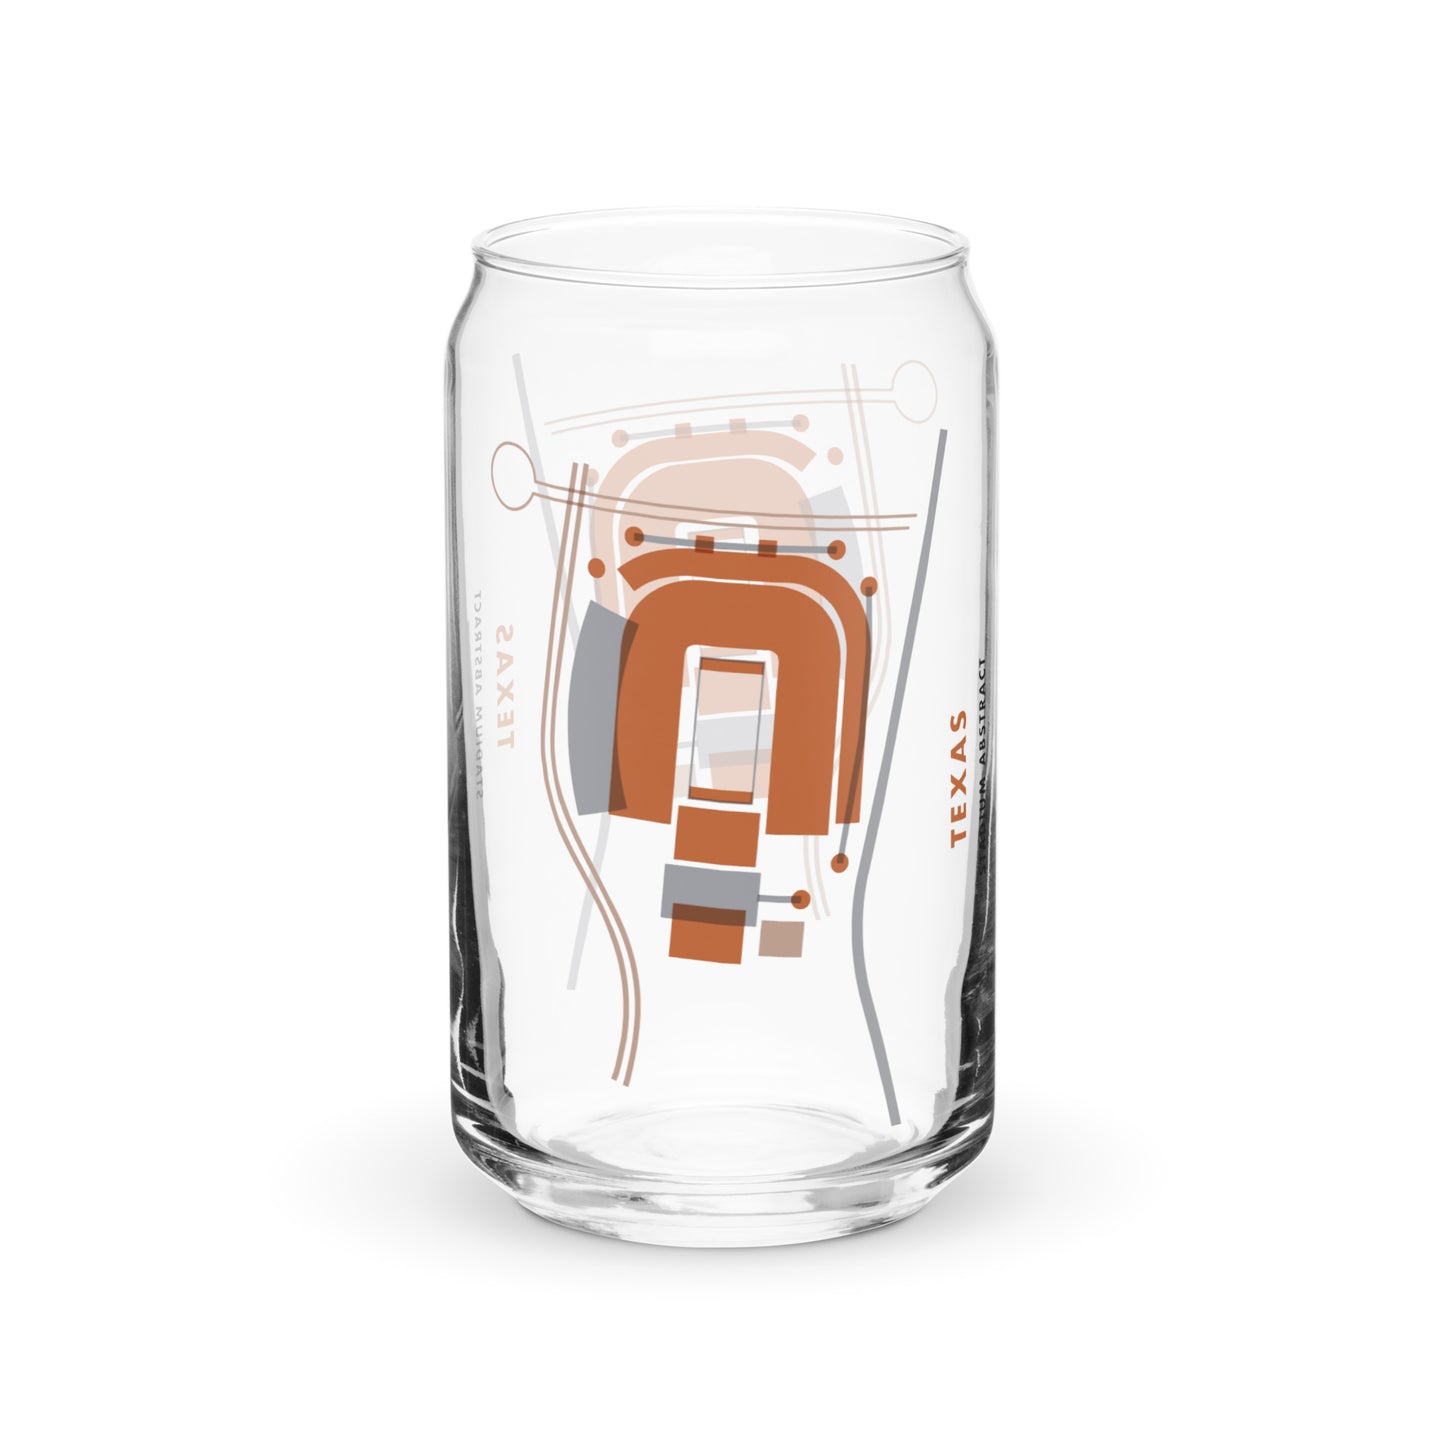 Texas Longhorns | Can-shaped glass